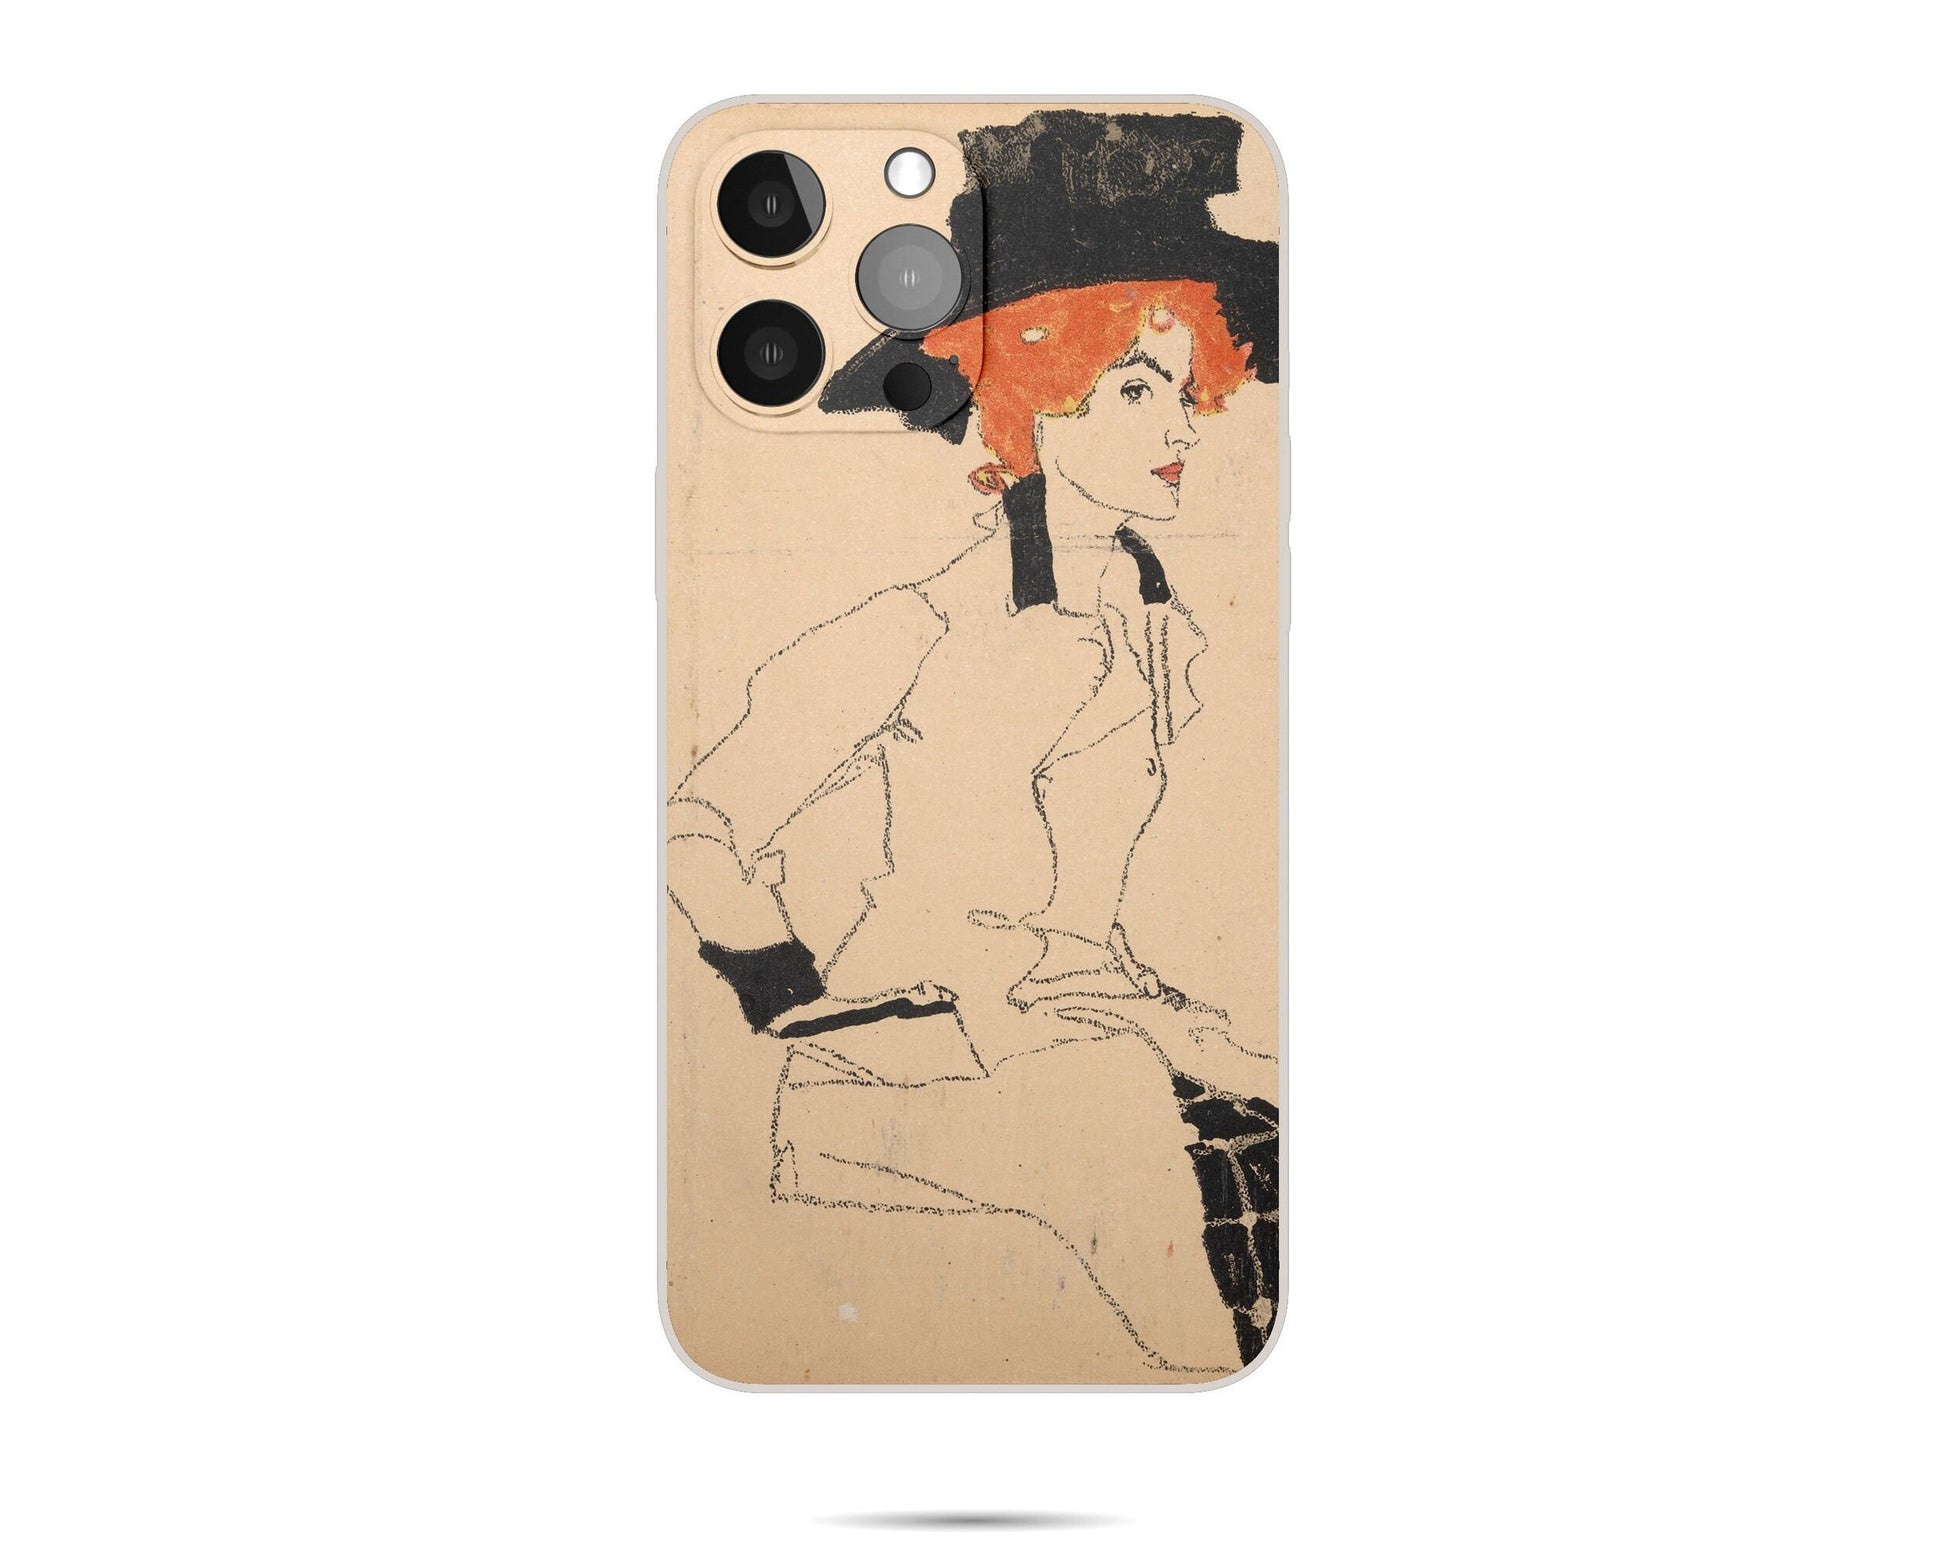 Iphone 14 Case Of Egon Schiele Famous Painting Iphone Cover, Iphone 13, Iphone 7 Plus, Expressionist , Colorful, Aesthetic Iphone